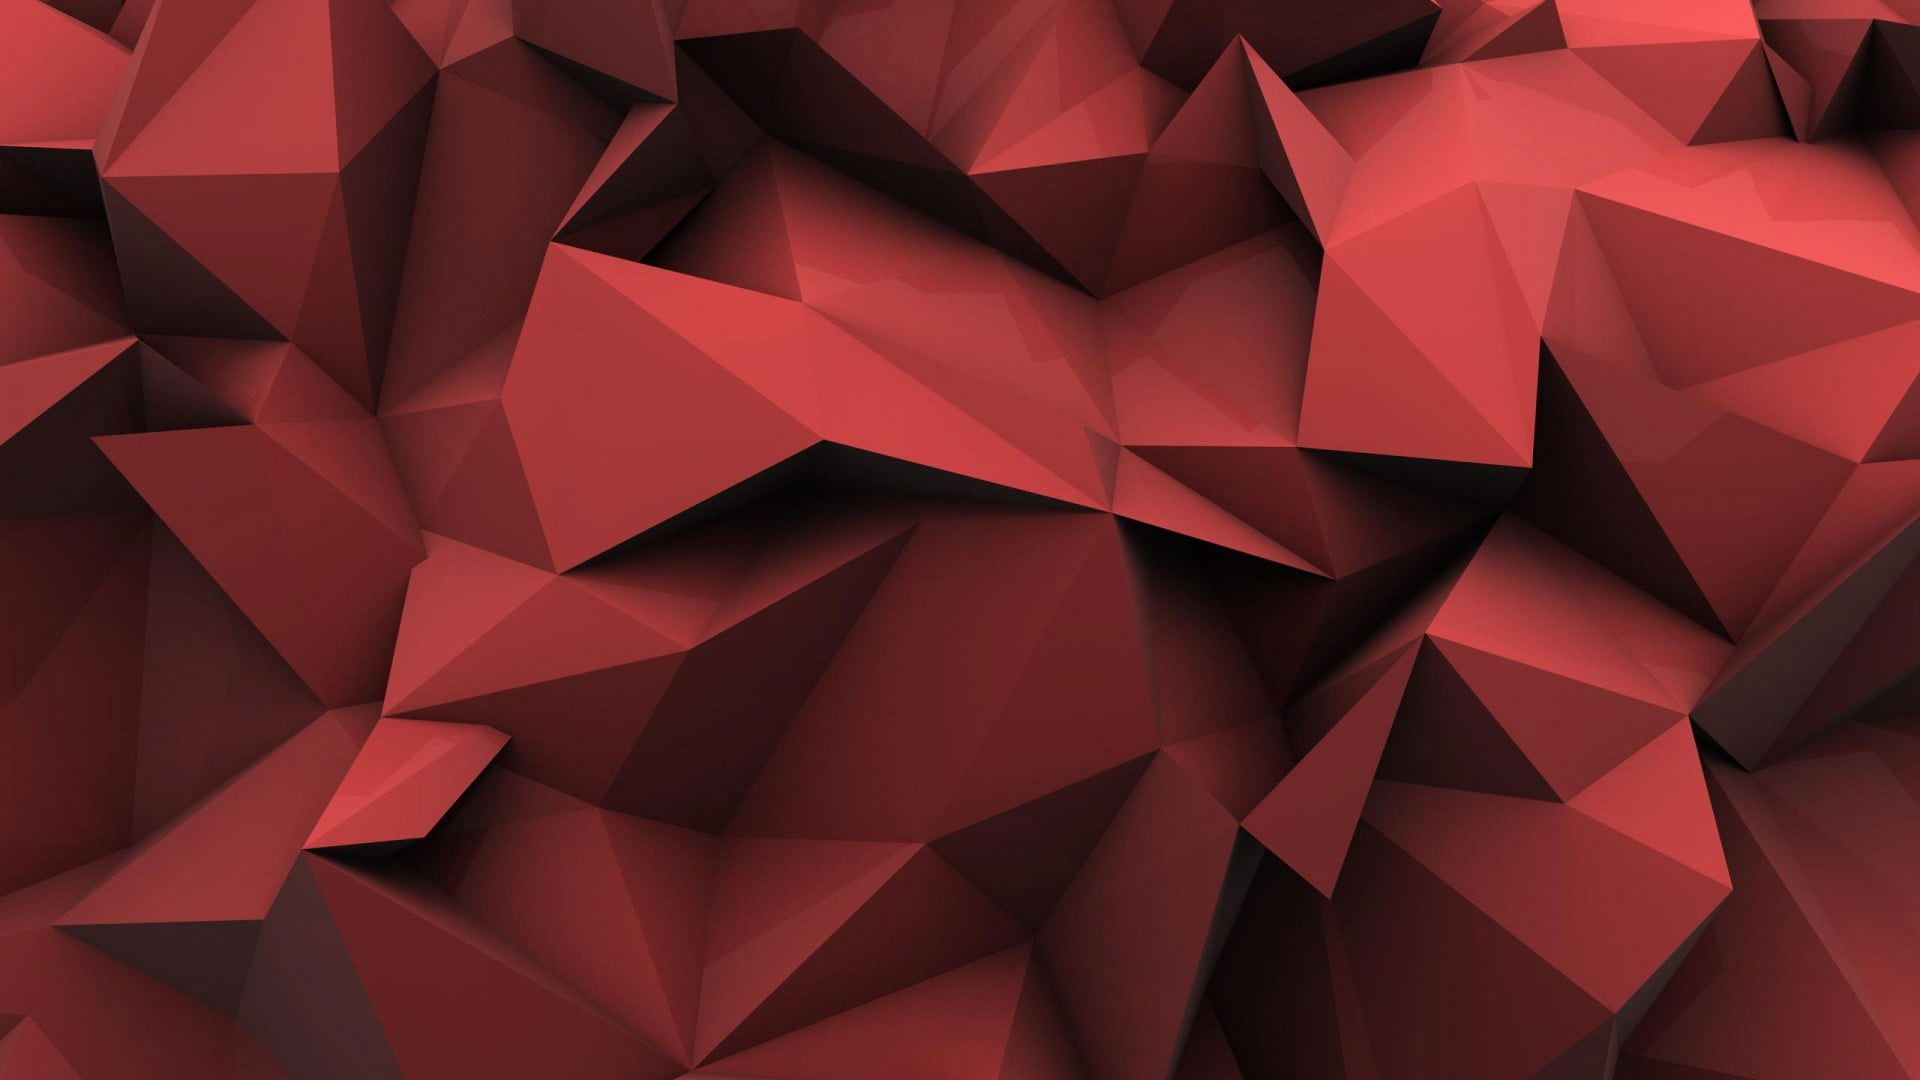 Polygon wallpaper, red and black origami wallpaper, minimalism, low poly, abstract